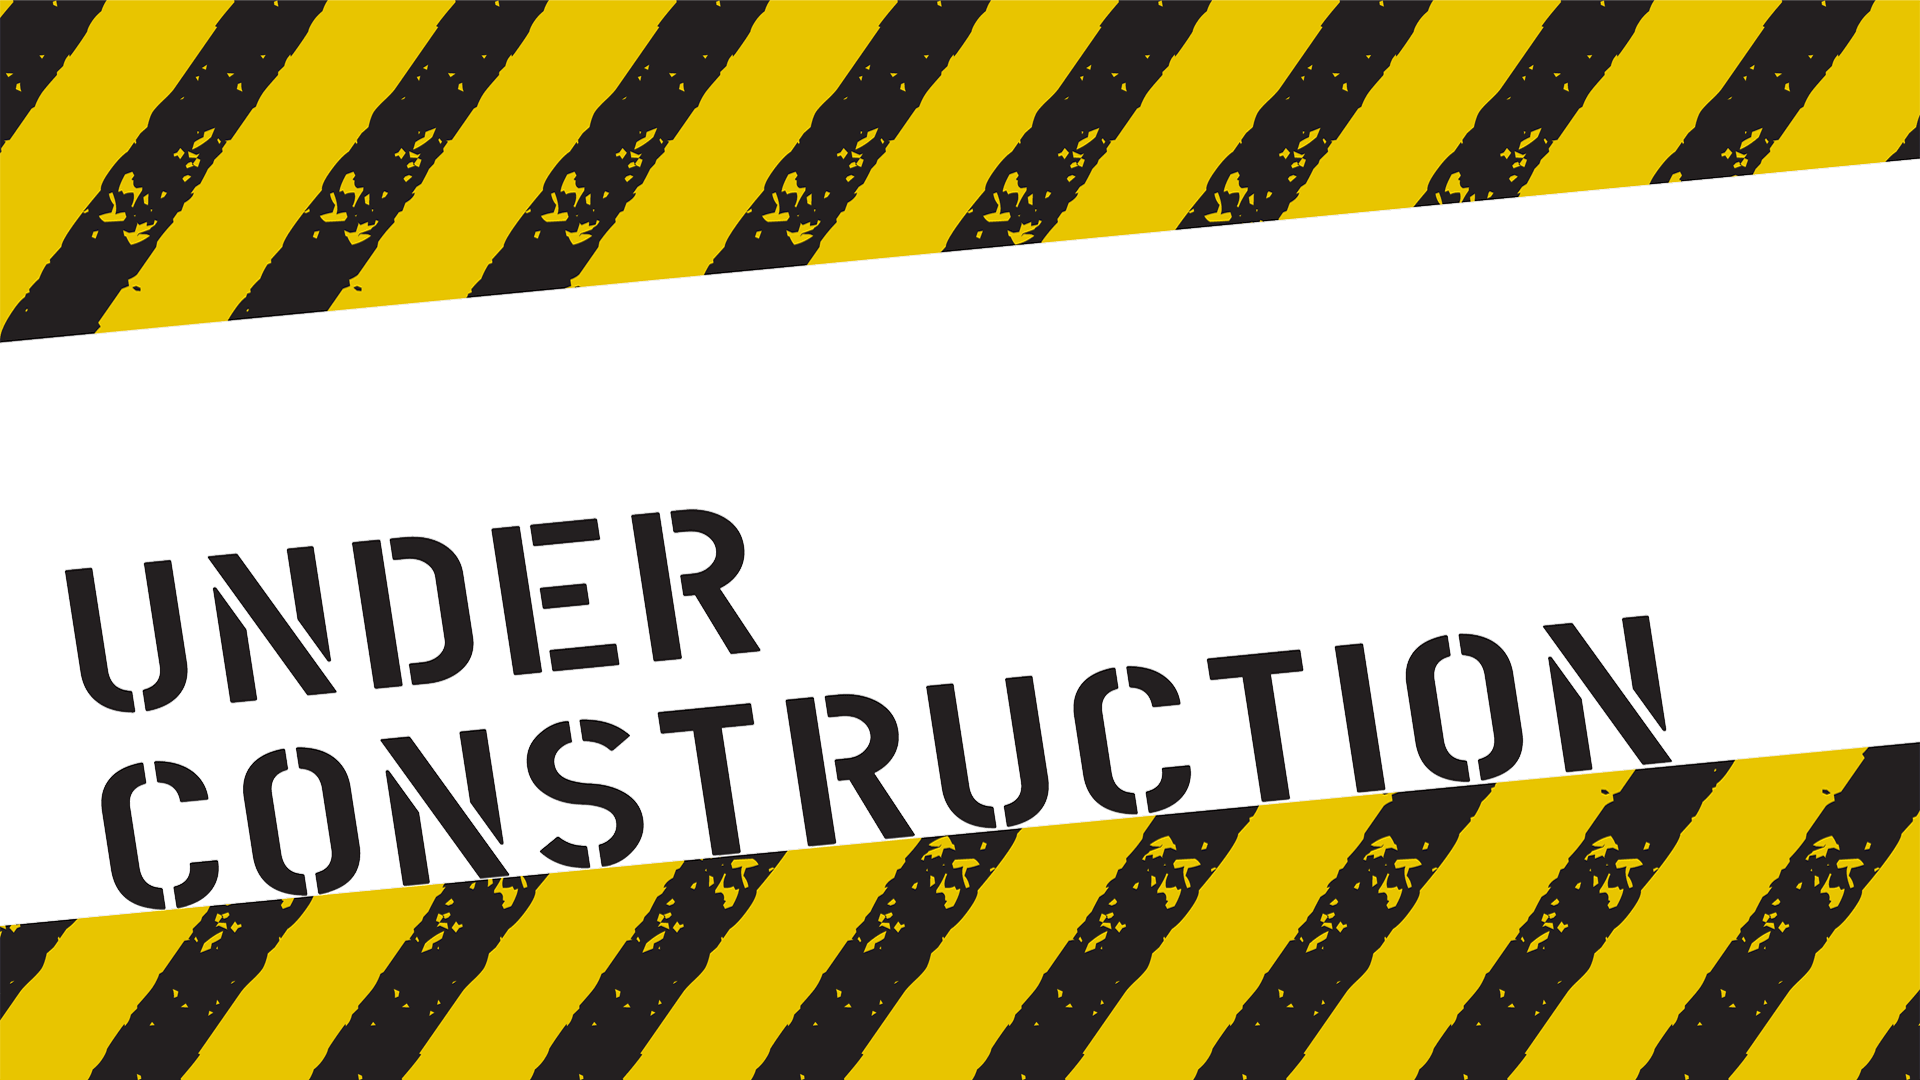 Construction border clip art clipart images gallery for free.